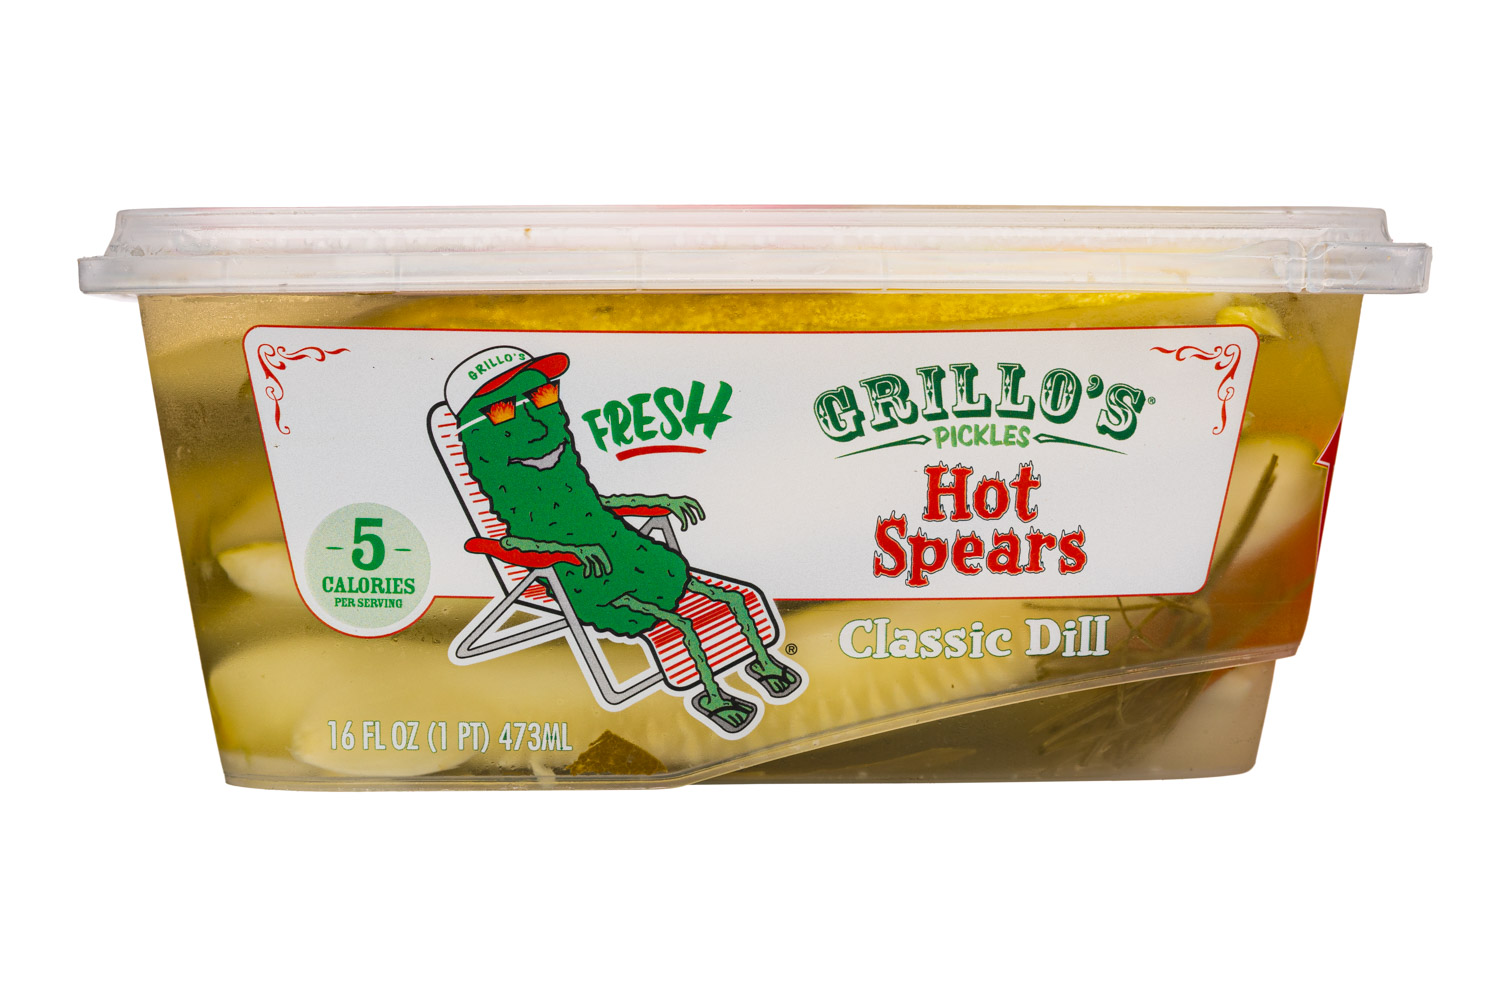 Classic Dill - Hot Spears